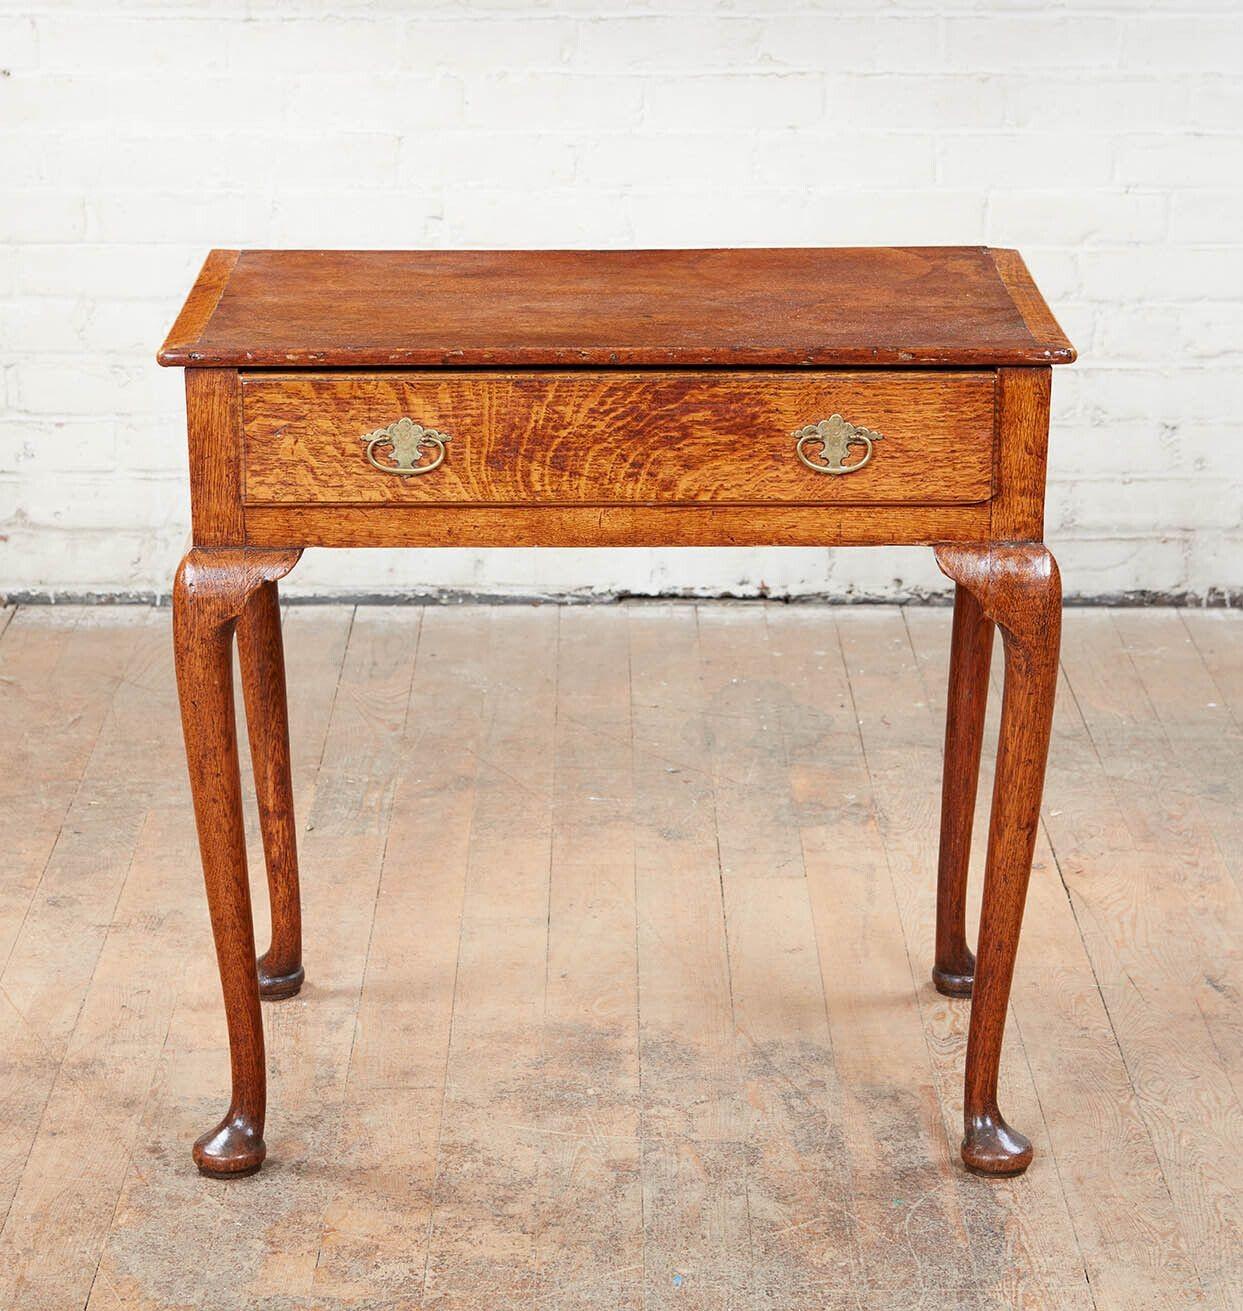 Good George I oak side table, the ogee molded top with mitered breadboard ends, over single drawer with etched brasses, standing on cabriole legs ending in turned pad feet, the whole with mellow pleasing color.